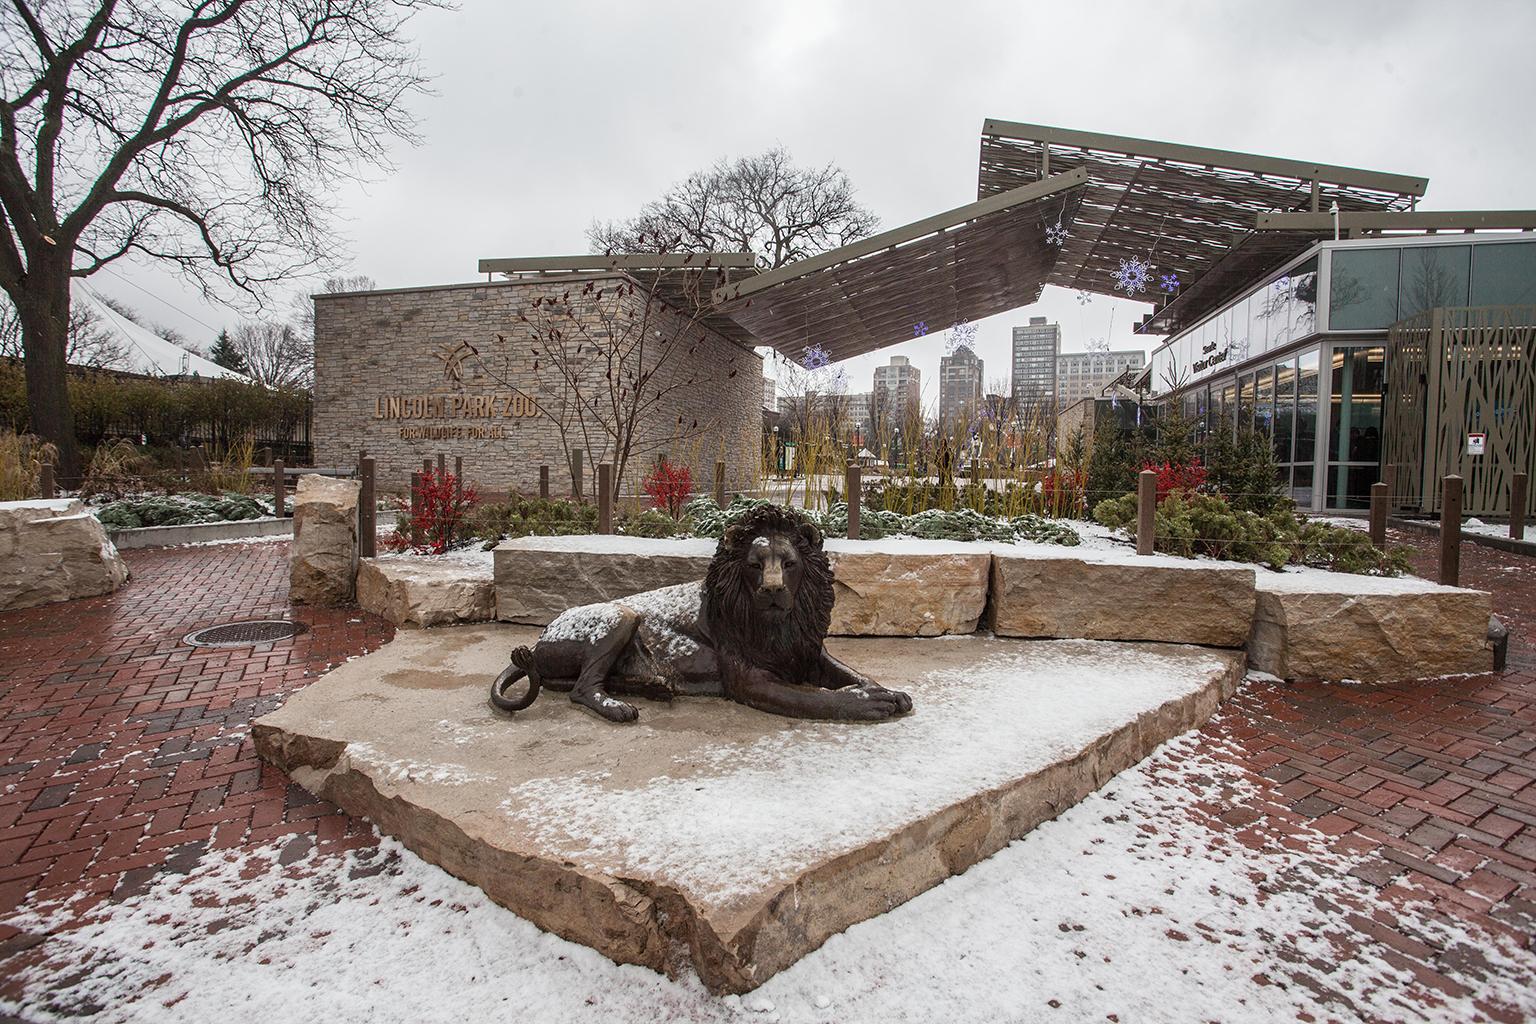 The Adelor lion statue sites outside of Lincoln Park Zoo’s new Searle Visitor Center. (Courtesy Lincoln Park Zoo) 